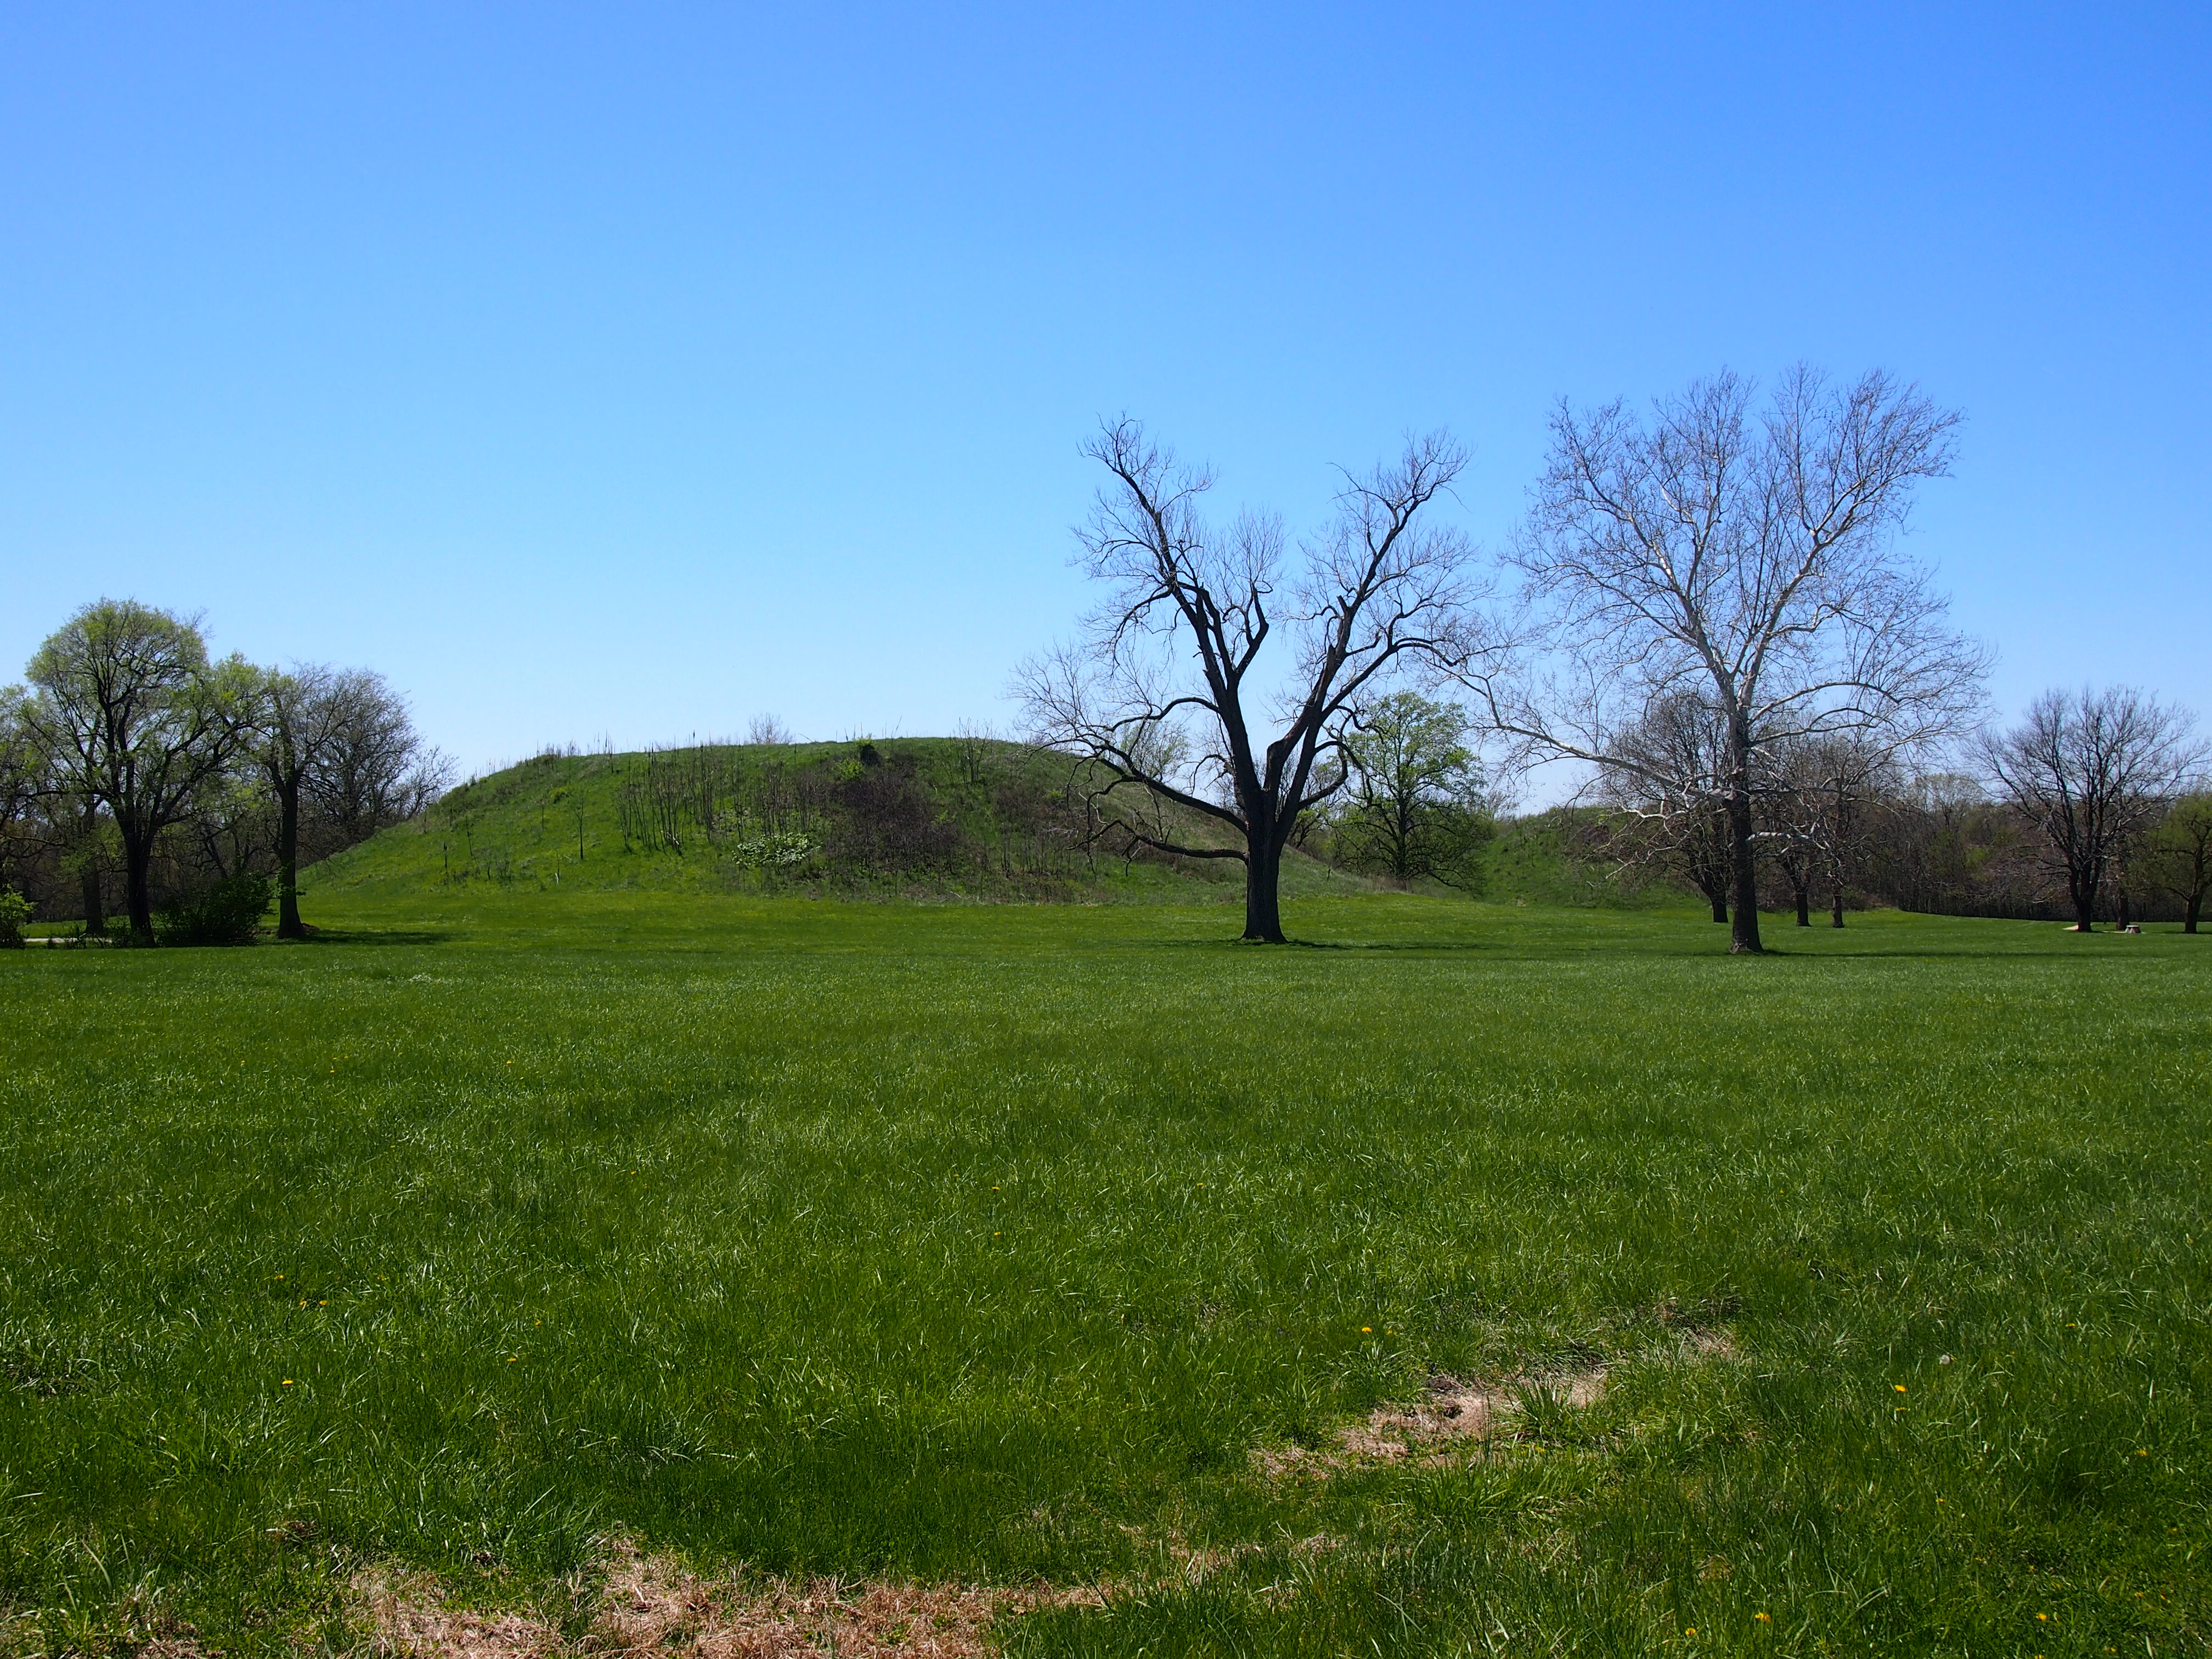 Cahokia Mounds State Historic Site | Been There, Seen That